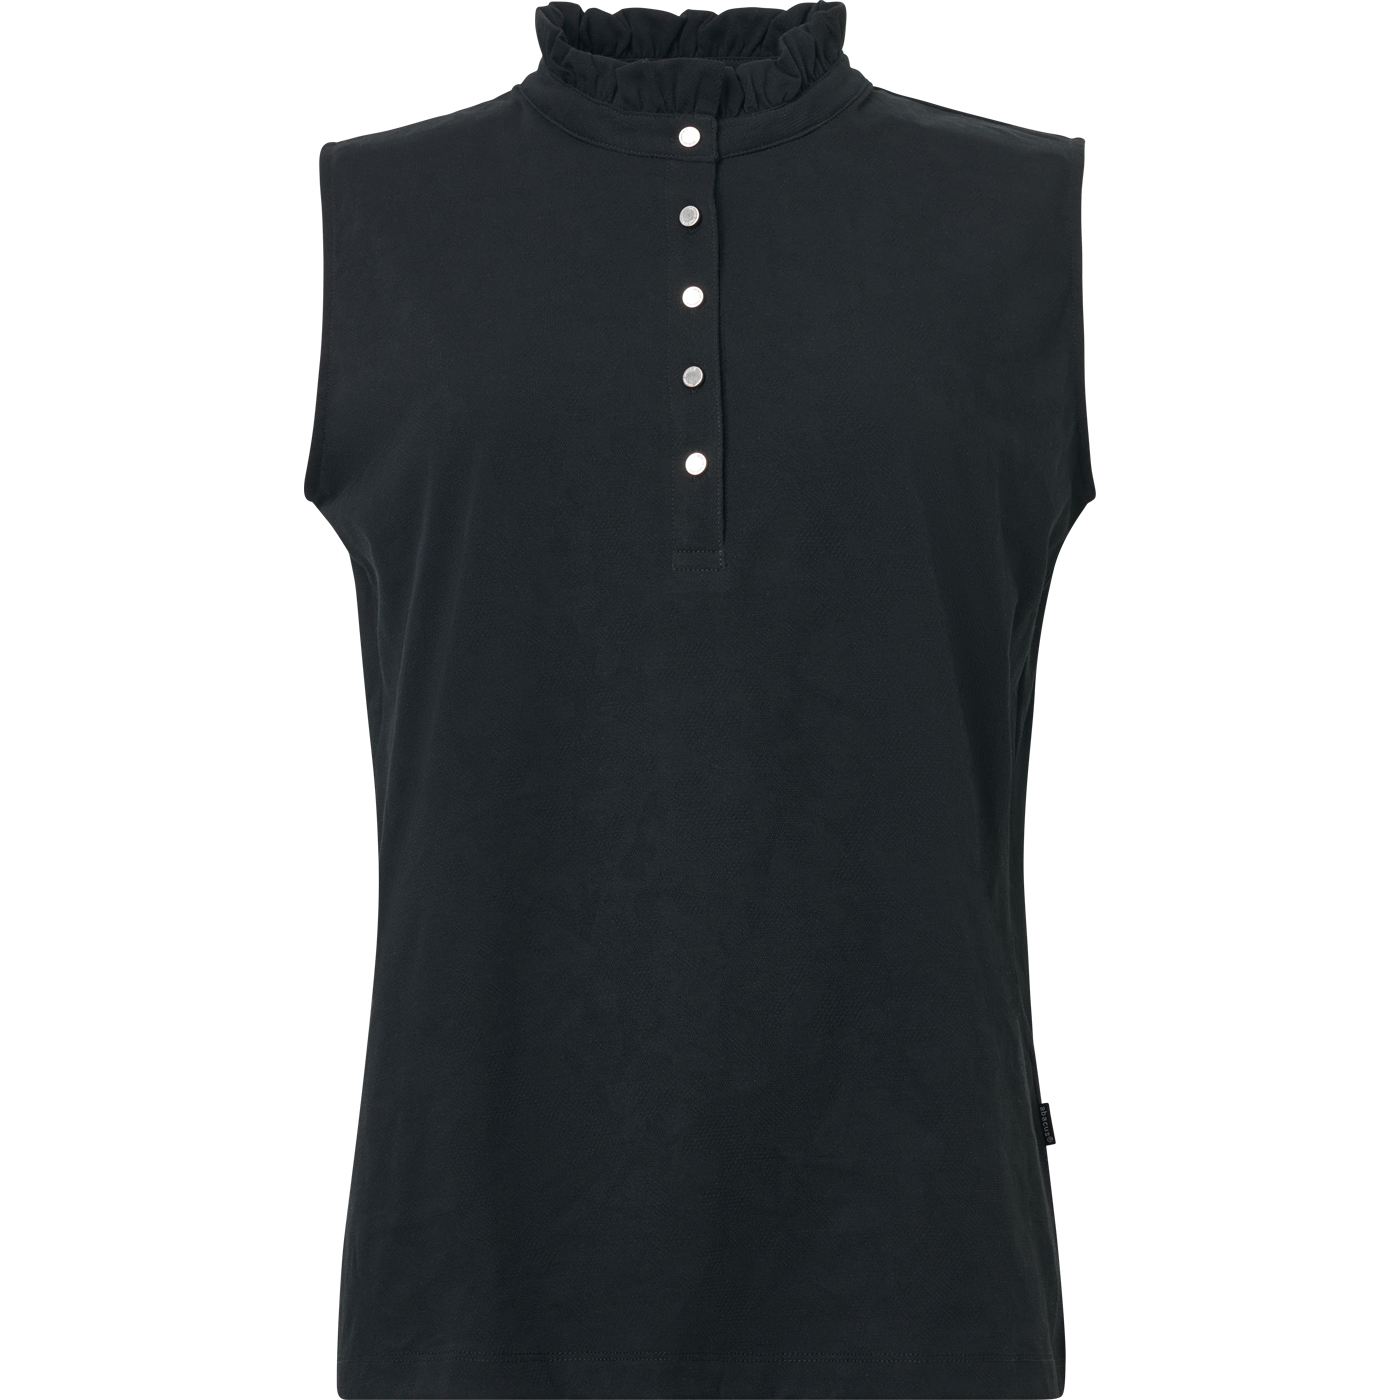 Lds Mauna sleeveless - black in the group WOMEN / All clothing at Abacus Sportswear (2764600)